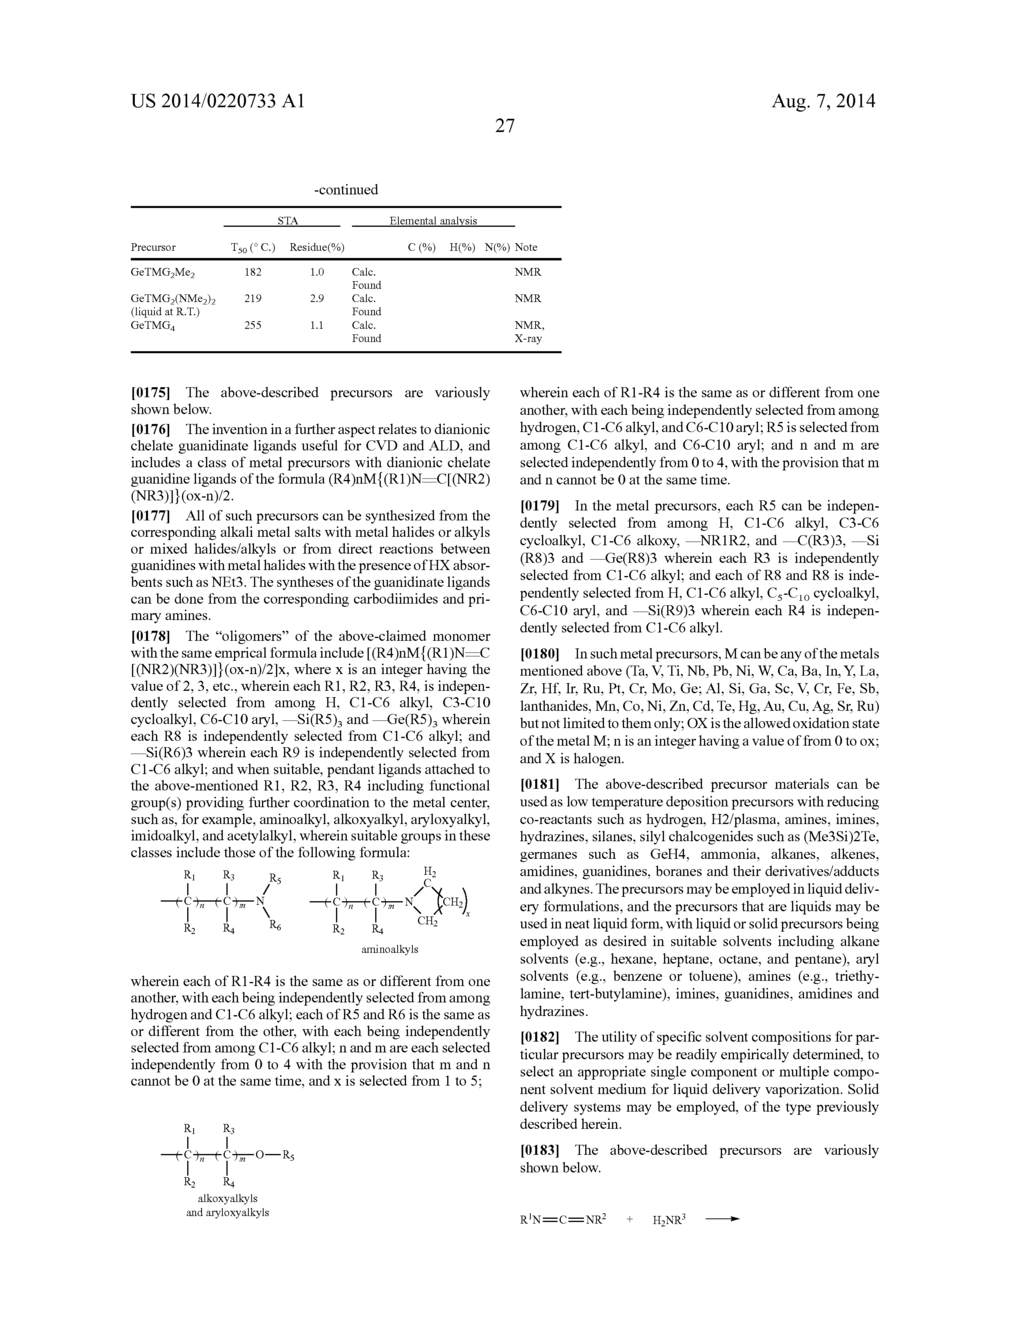 ANTIMONY AND GERMANIUM COMPLEXES USEFUL FOR CVD/ALD OF METAL THIN FILMS - diagram, schematic, and image 33